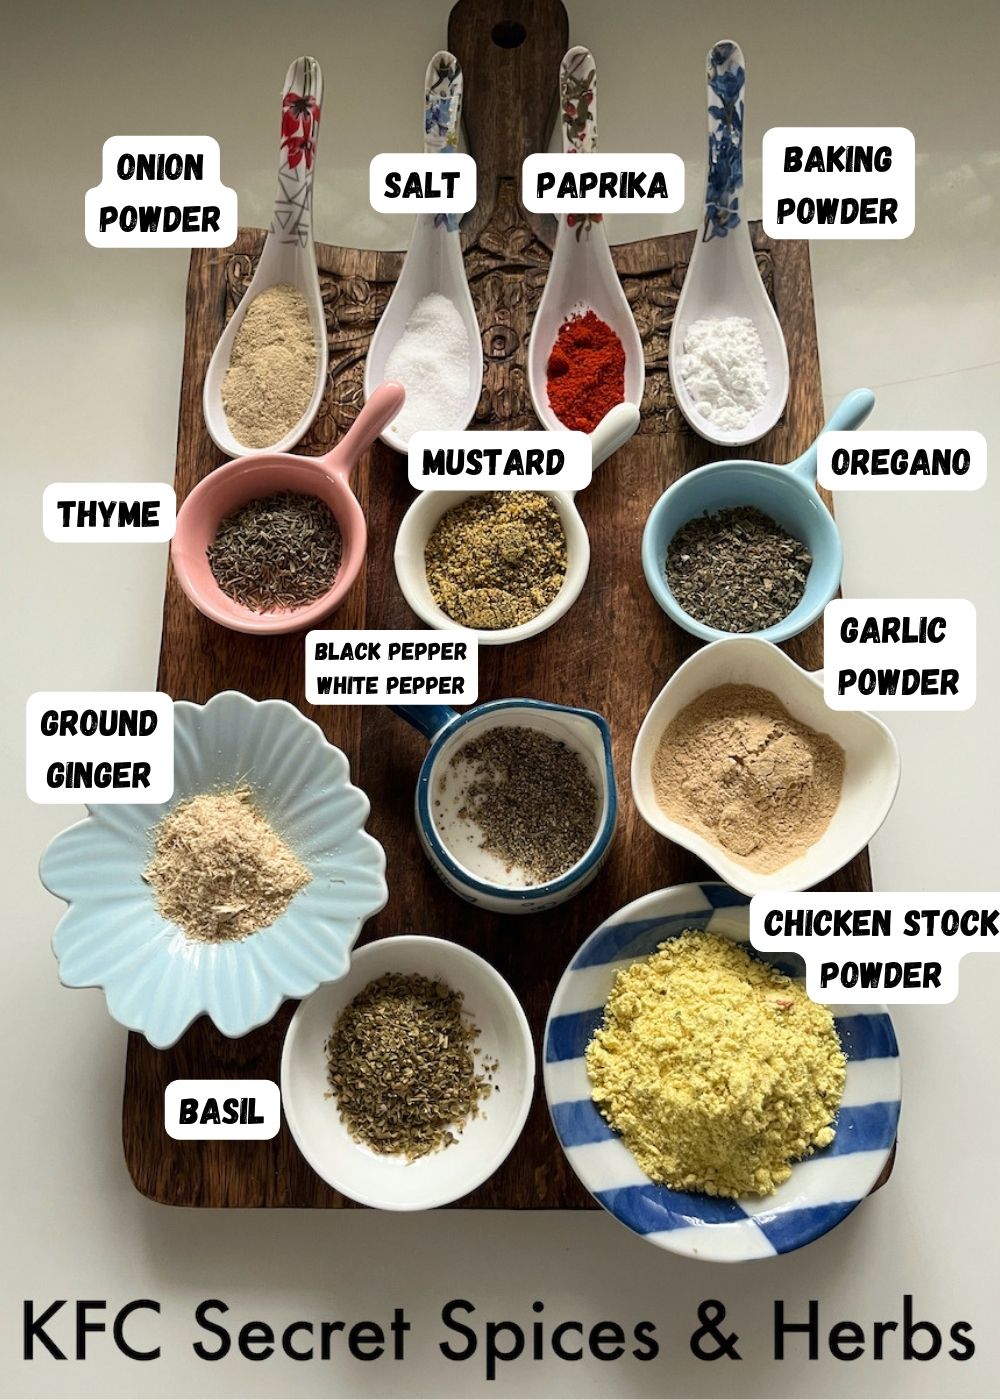 ingredients and secret spices used for making kfc chicken